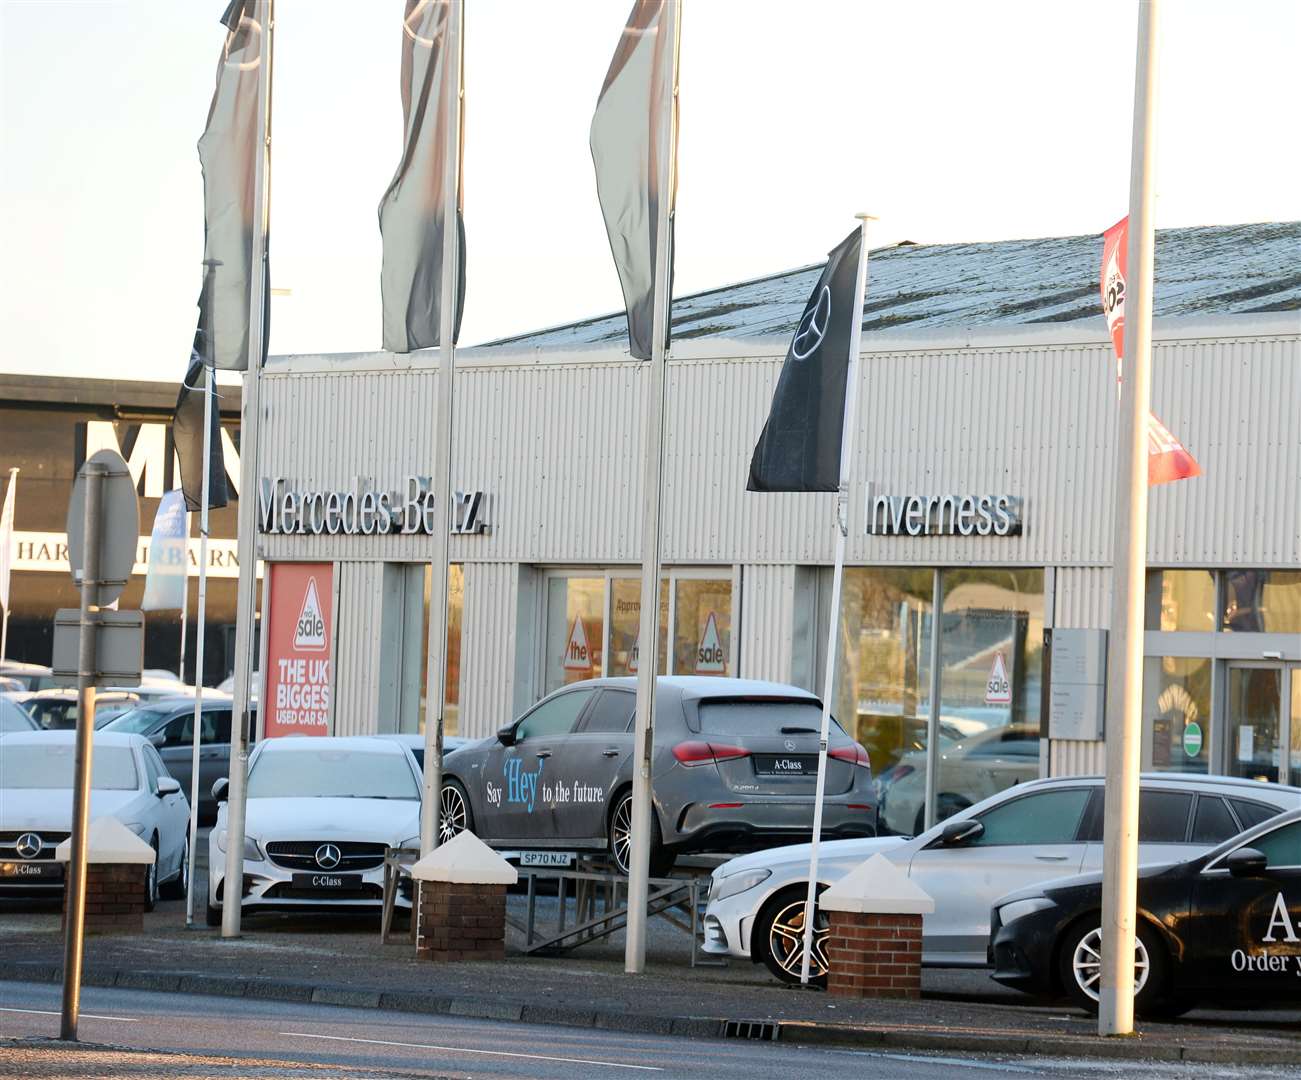 The Inverness branch of Arnold Clark Mercedes-Benz.